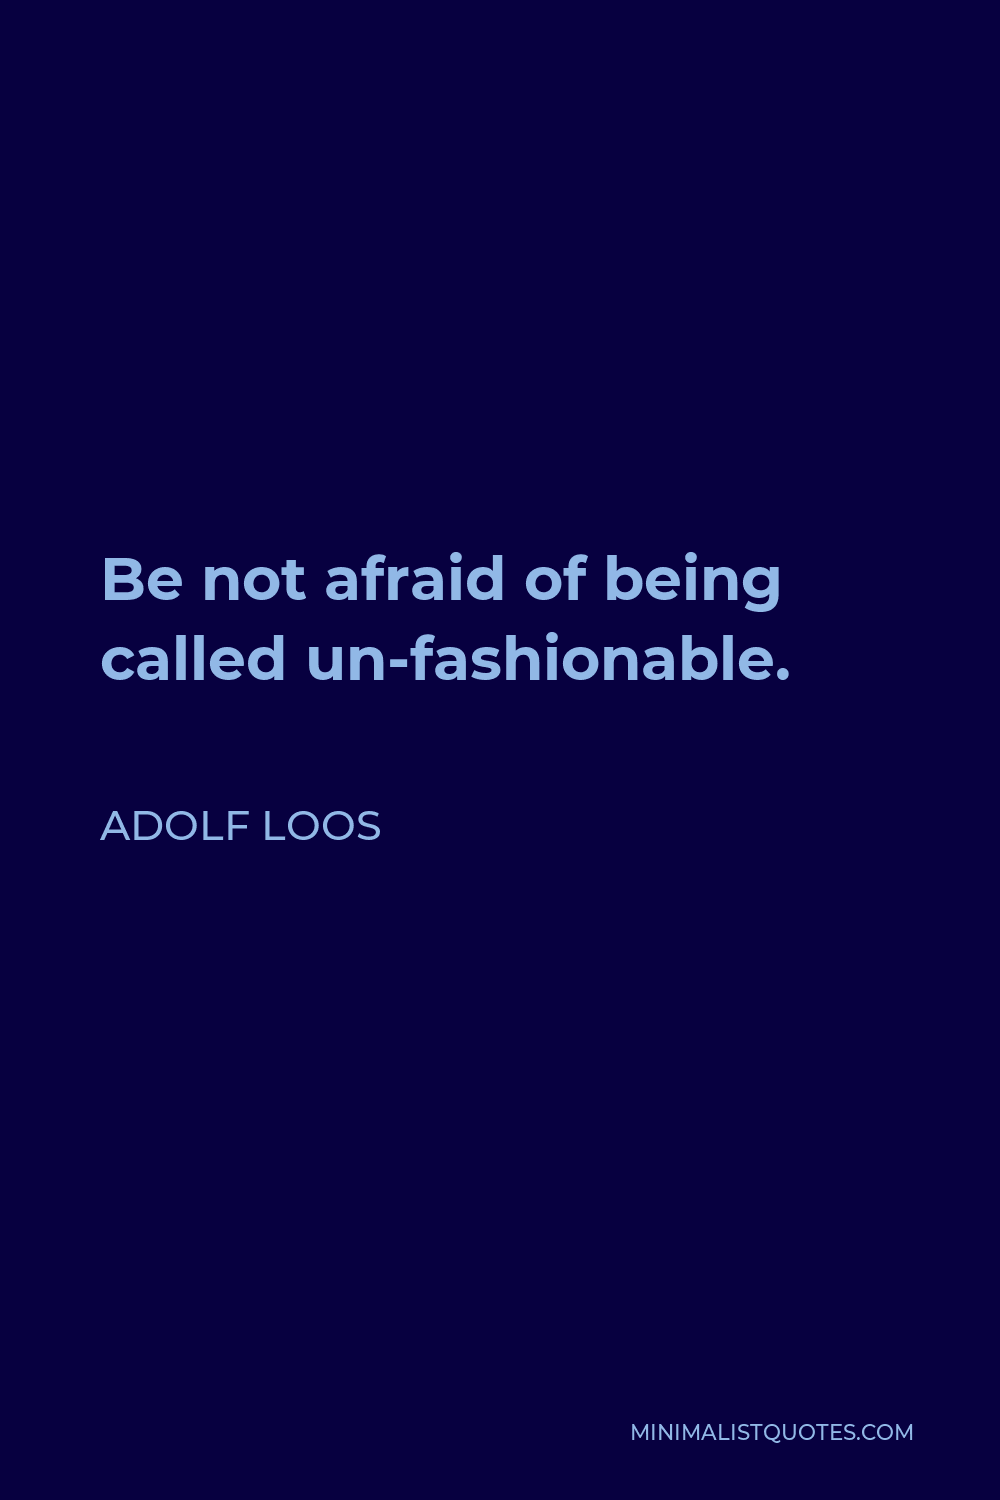 Adolf Loos Quote - Be not afraid of being called un-fashionable.